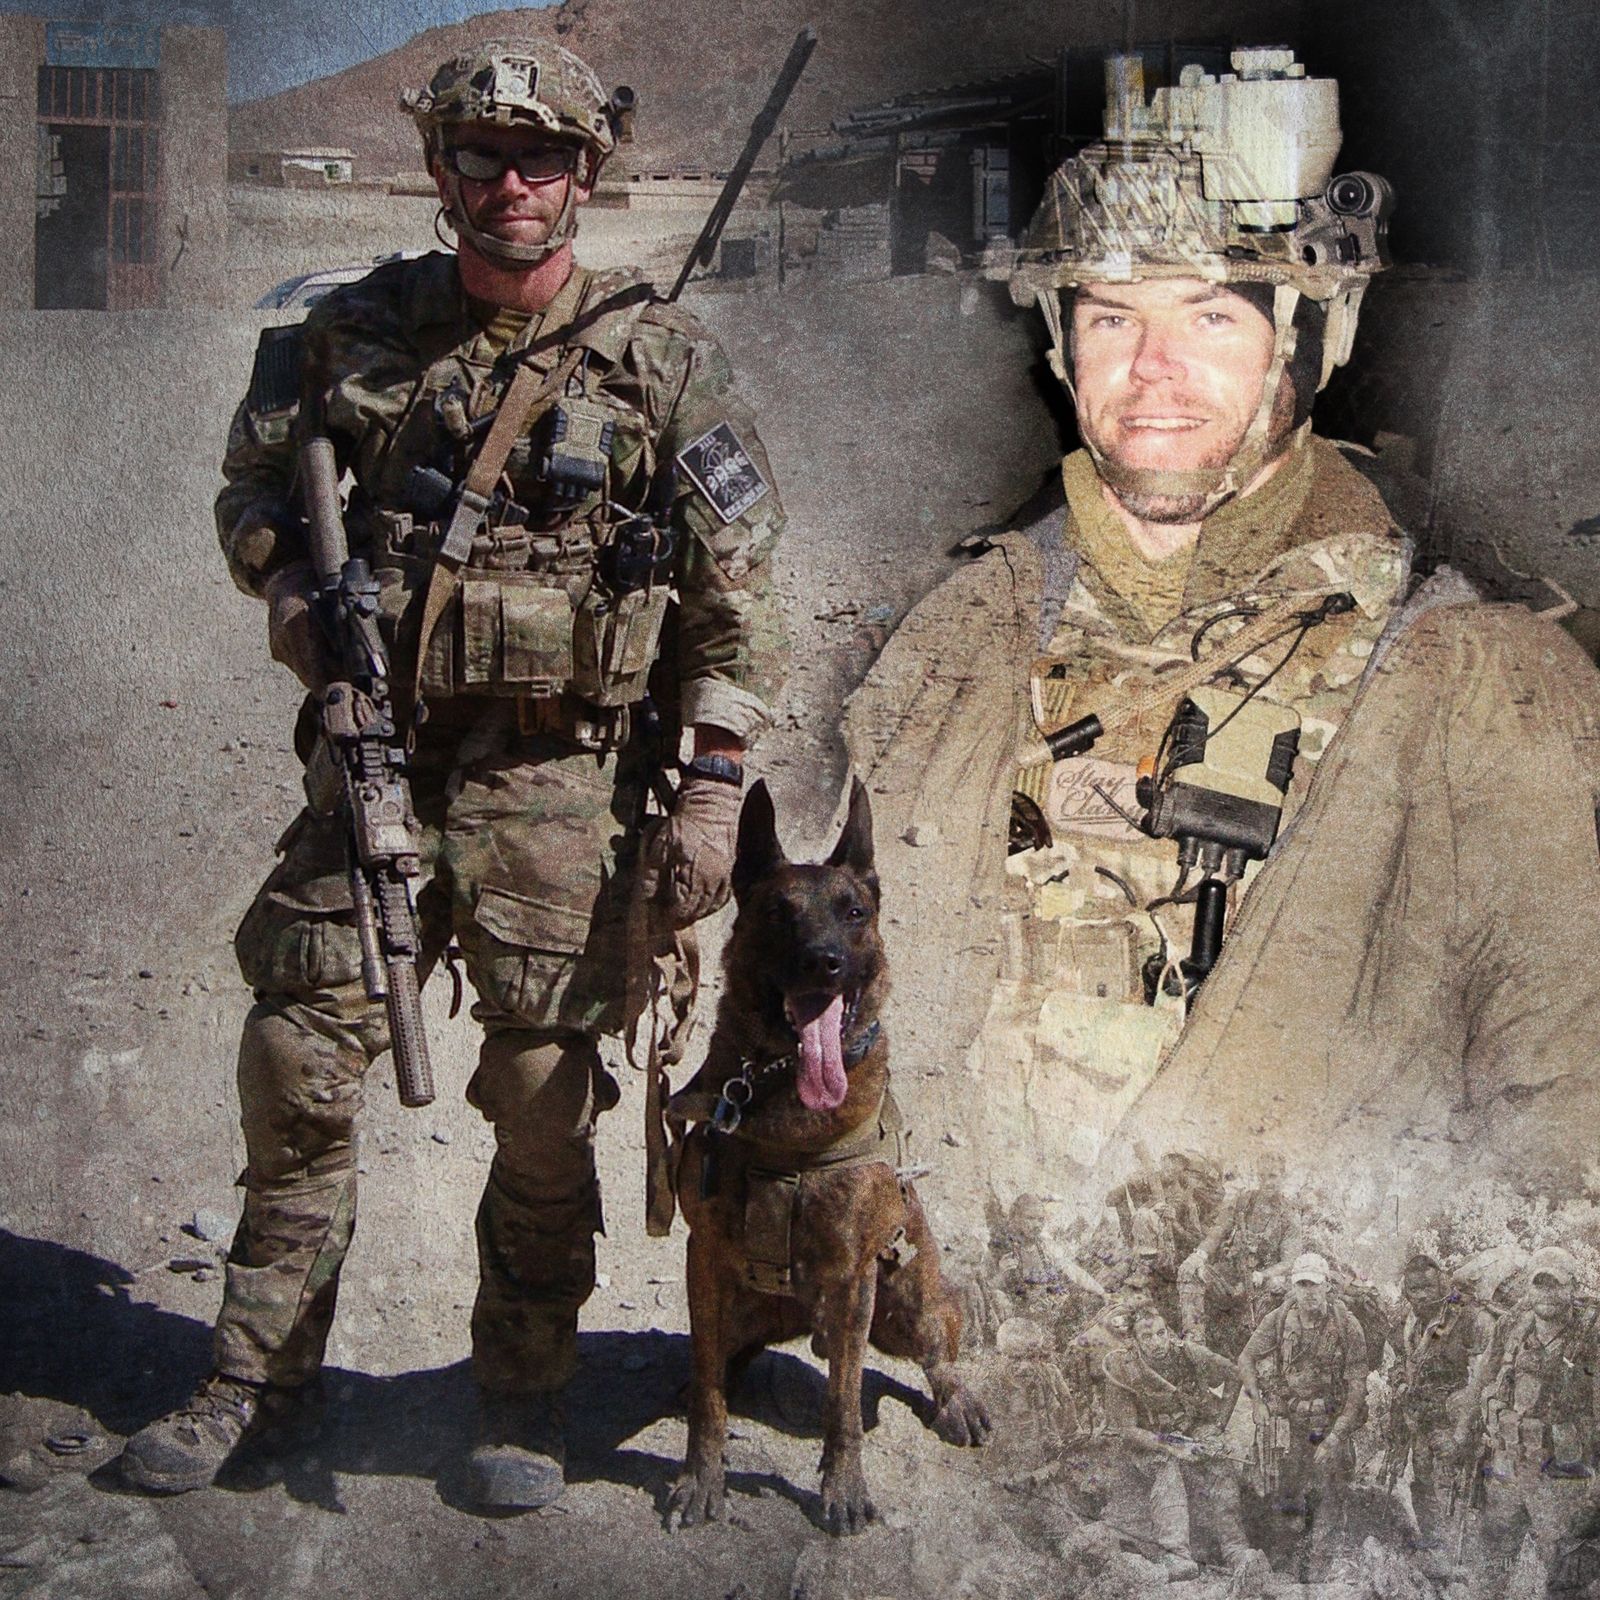 Team Never Quit / Travis Osborn: Airborne Ranger and Green Beret Medic who  treated Marcus Luttrell in ORW Rescue Mission